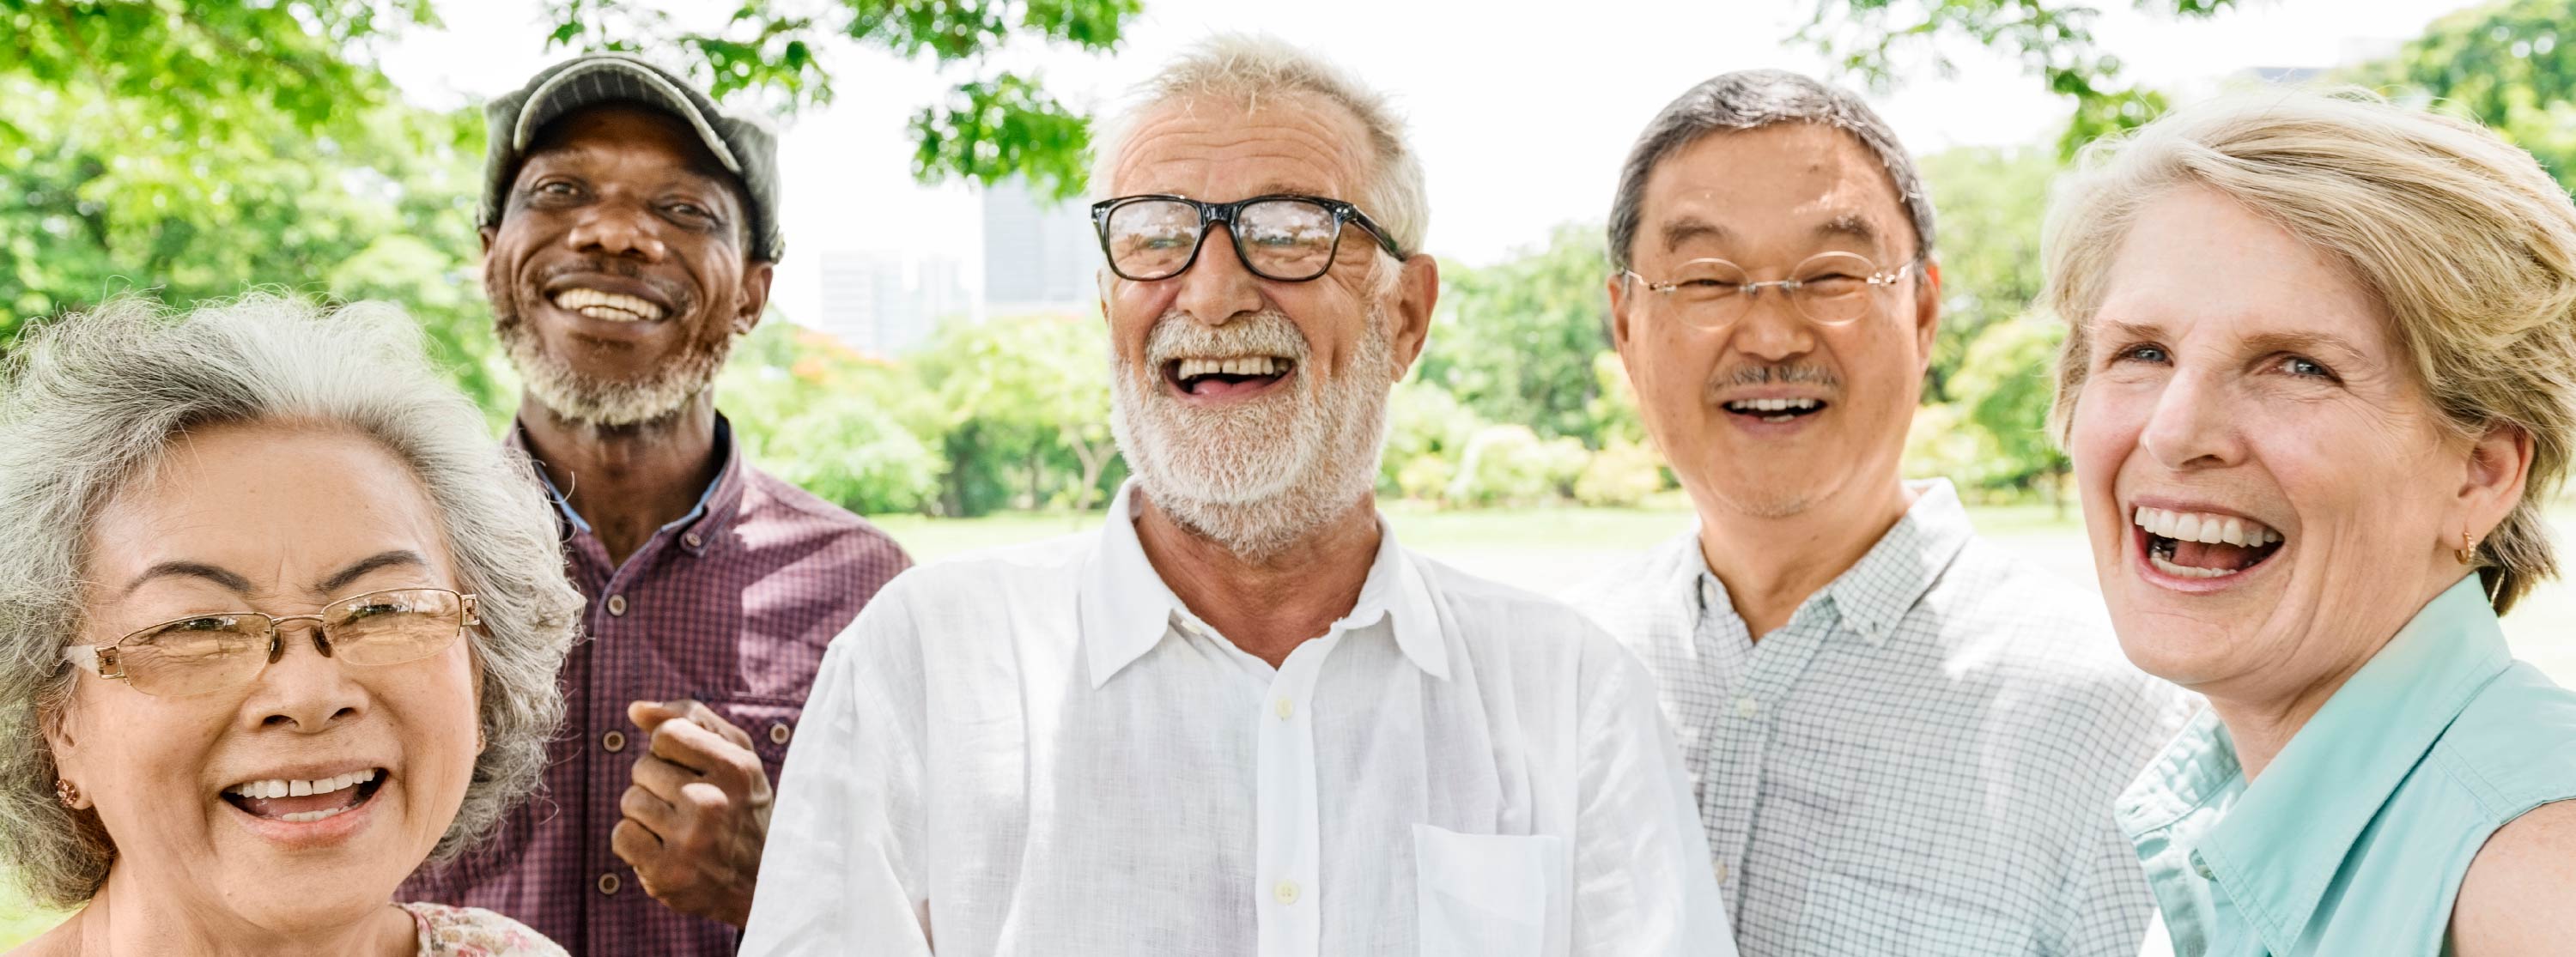 Older people, group photo, happy, outside